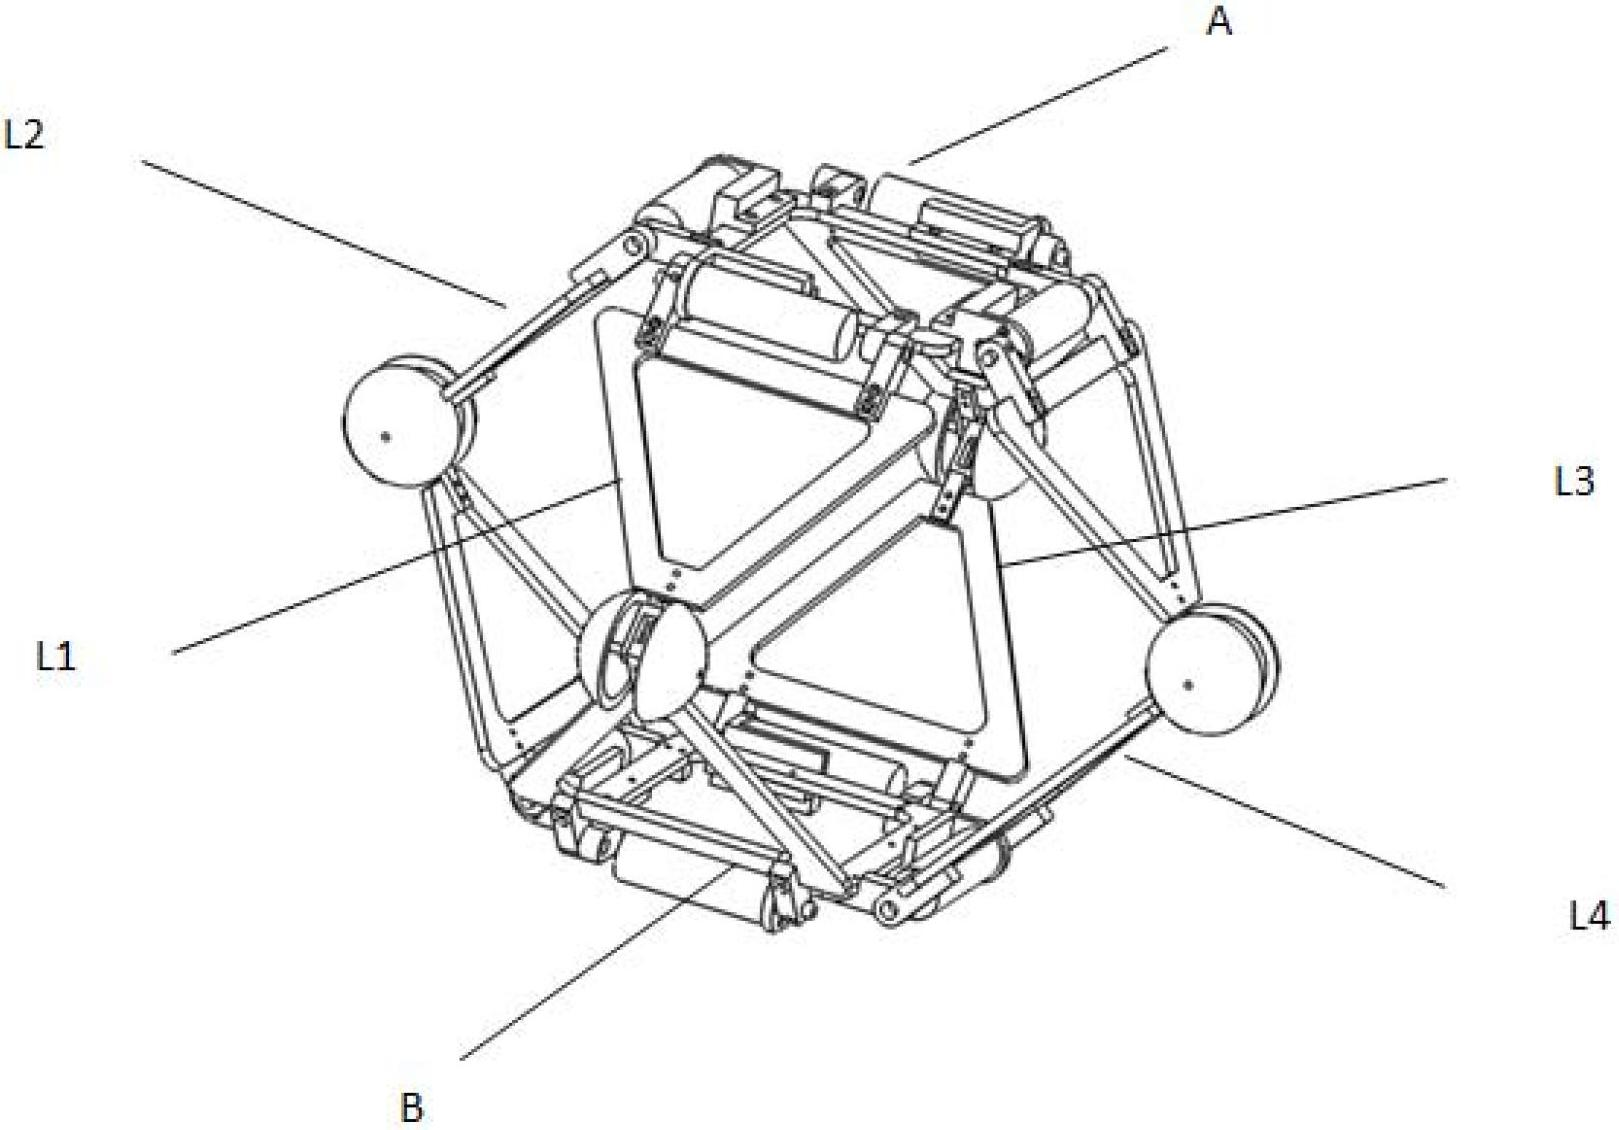 Polyhedral rolling mechanism